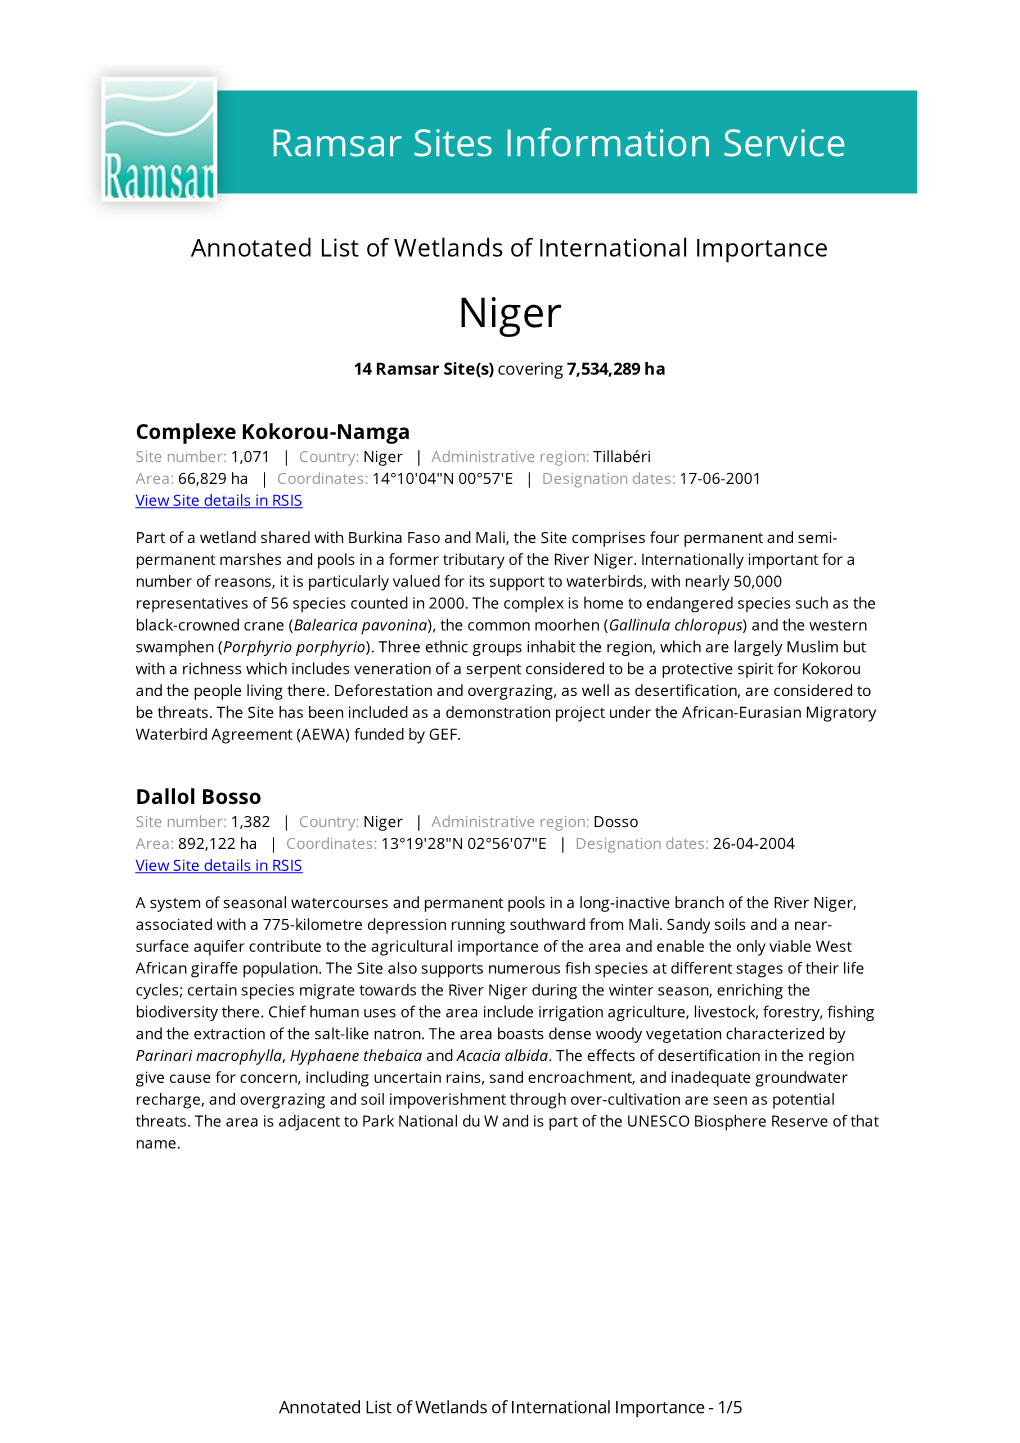 Annotated List of Wetlands of International Importance Niger